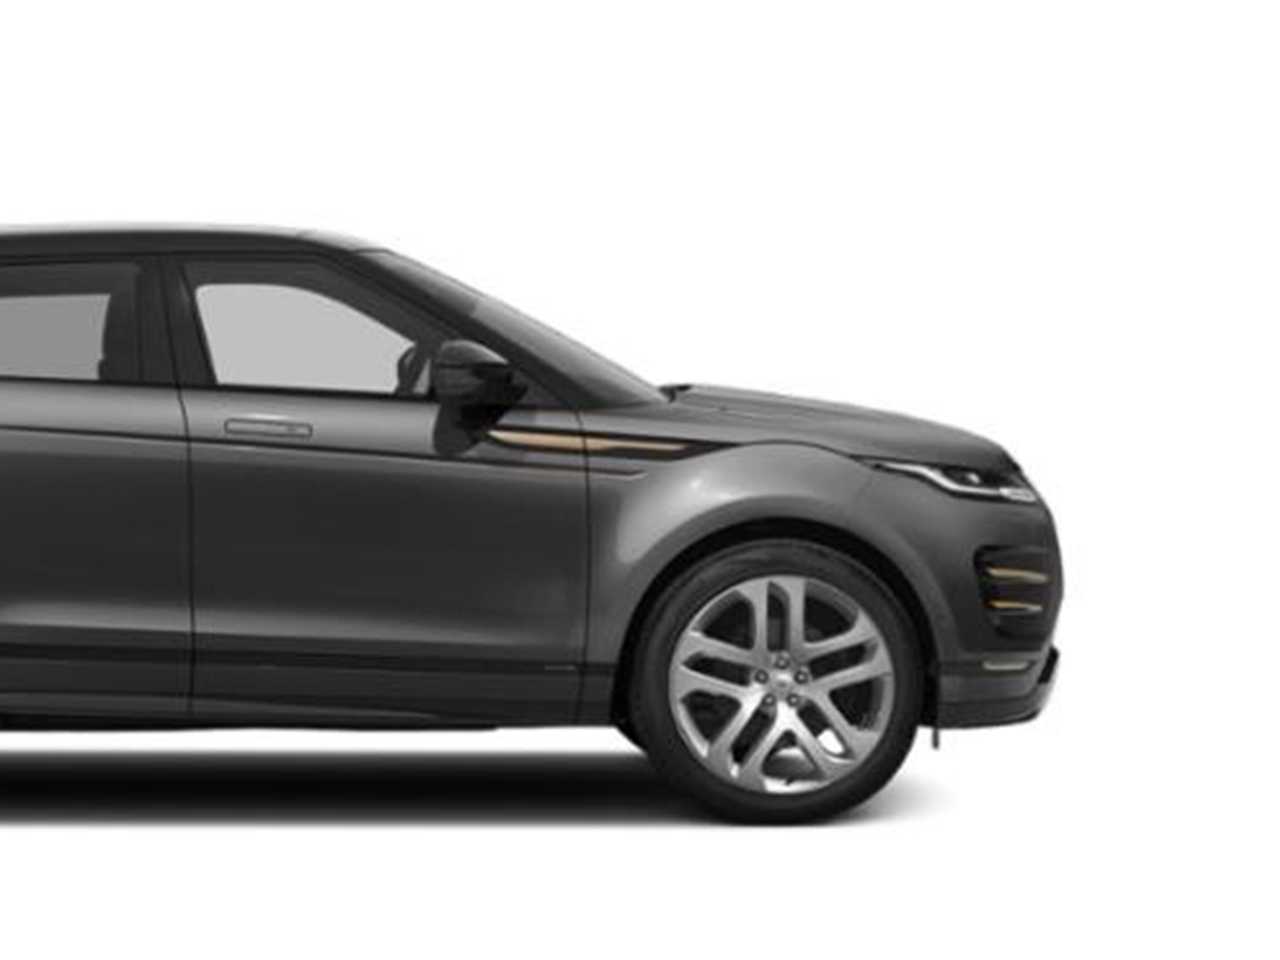 Range Rover Evoque car for hire in London by Hertz Dream Collection